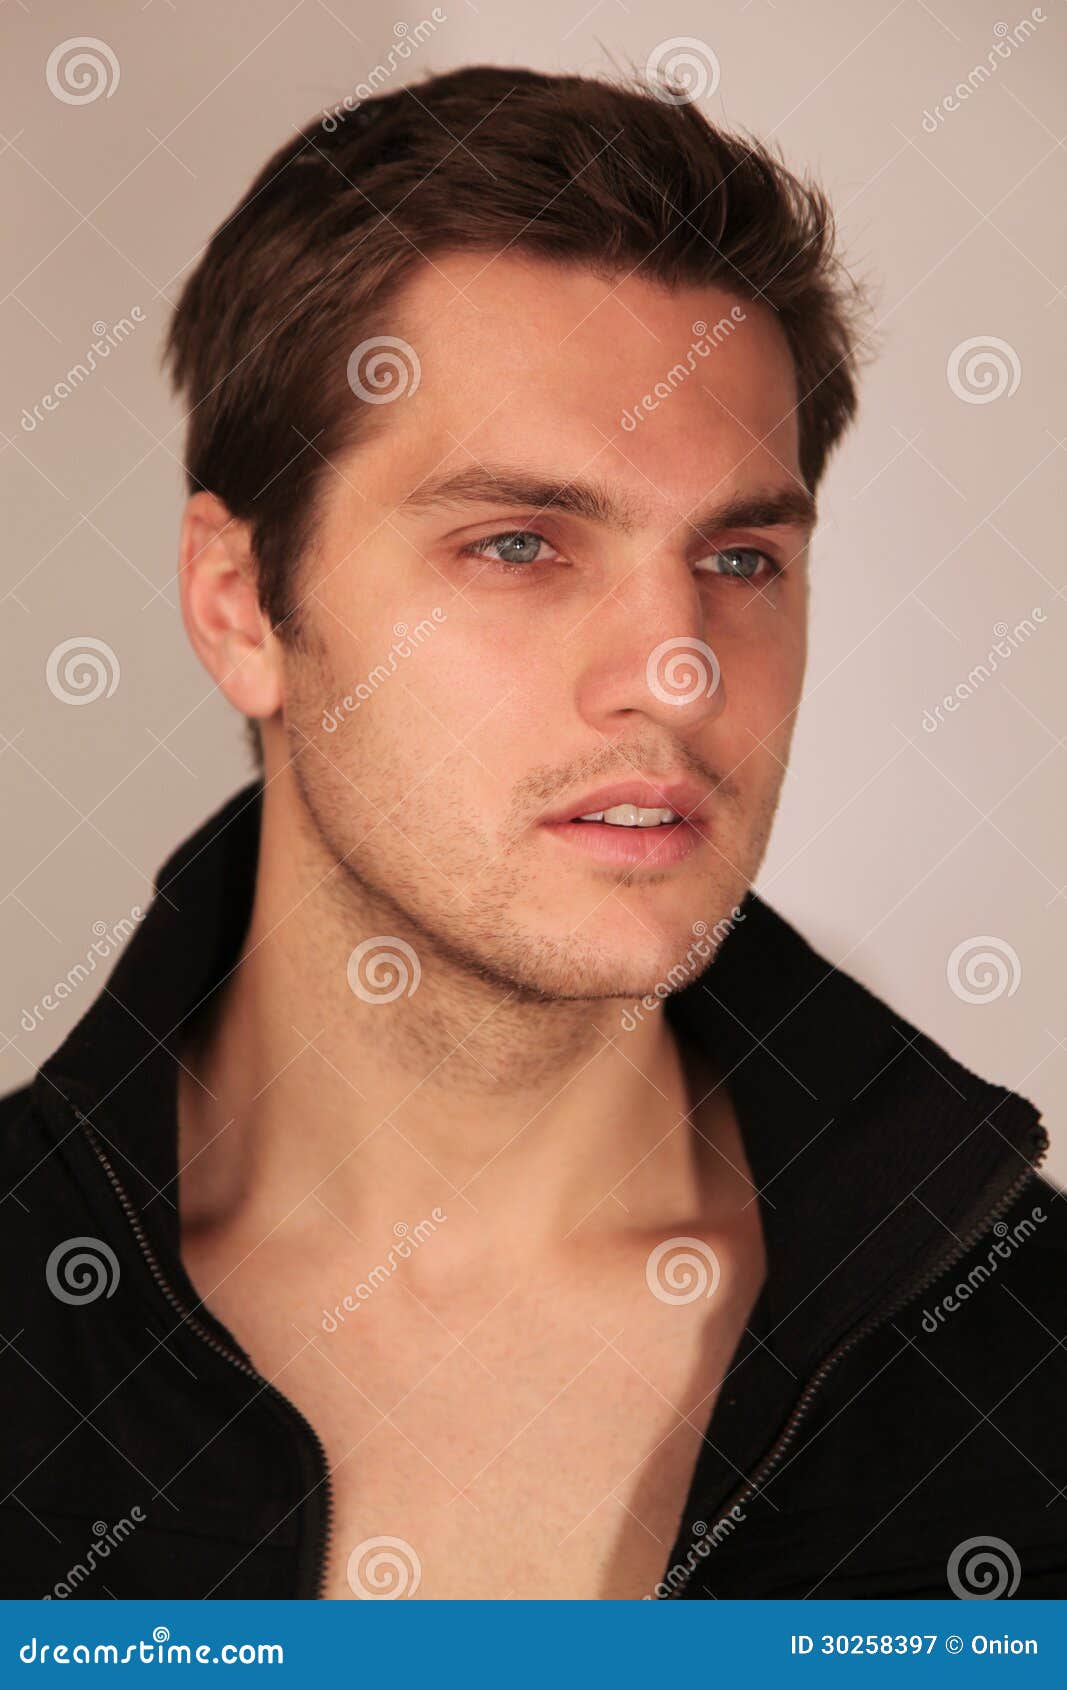 Handsome Caucasian Male Royalty Free Stock Photography 